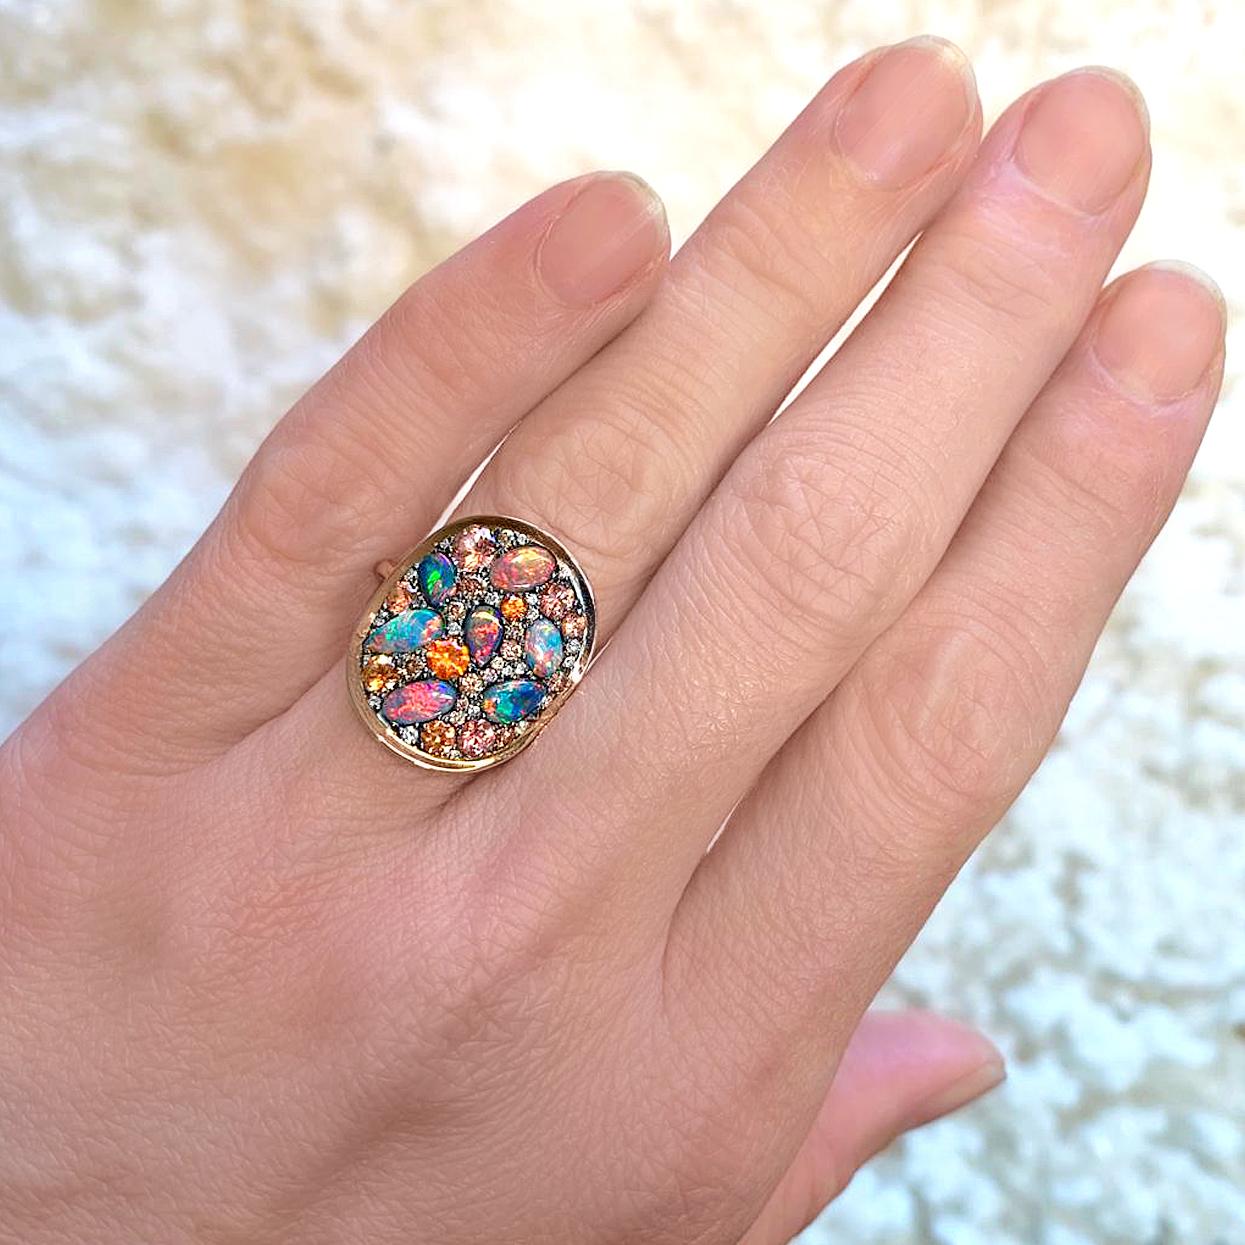 One of a Kind Starstruck Ring handcrafted in Belgium by jewelry maker Joke Quick in high-polished 18k rose gold featuring a curved oval element in blackened sterling silver set with an assortment of spectacular natural gemstones, including